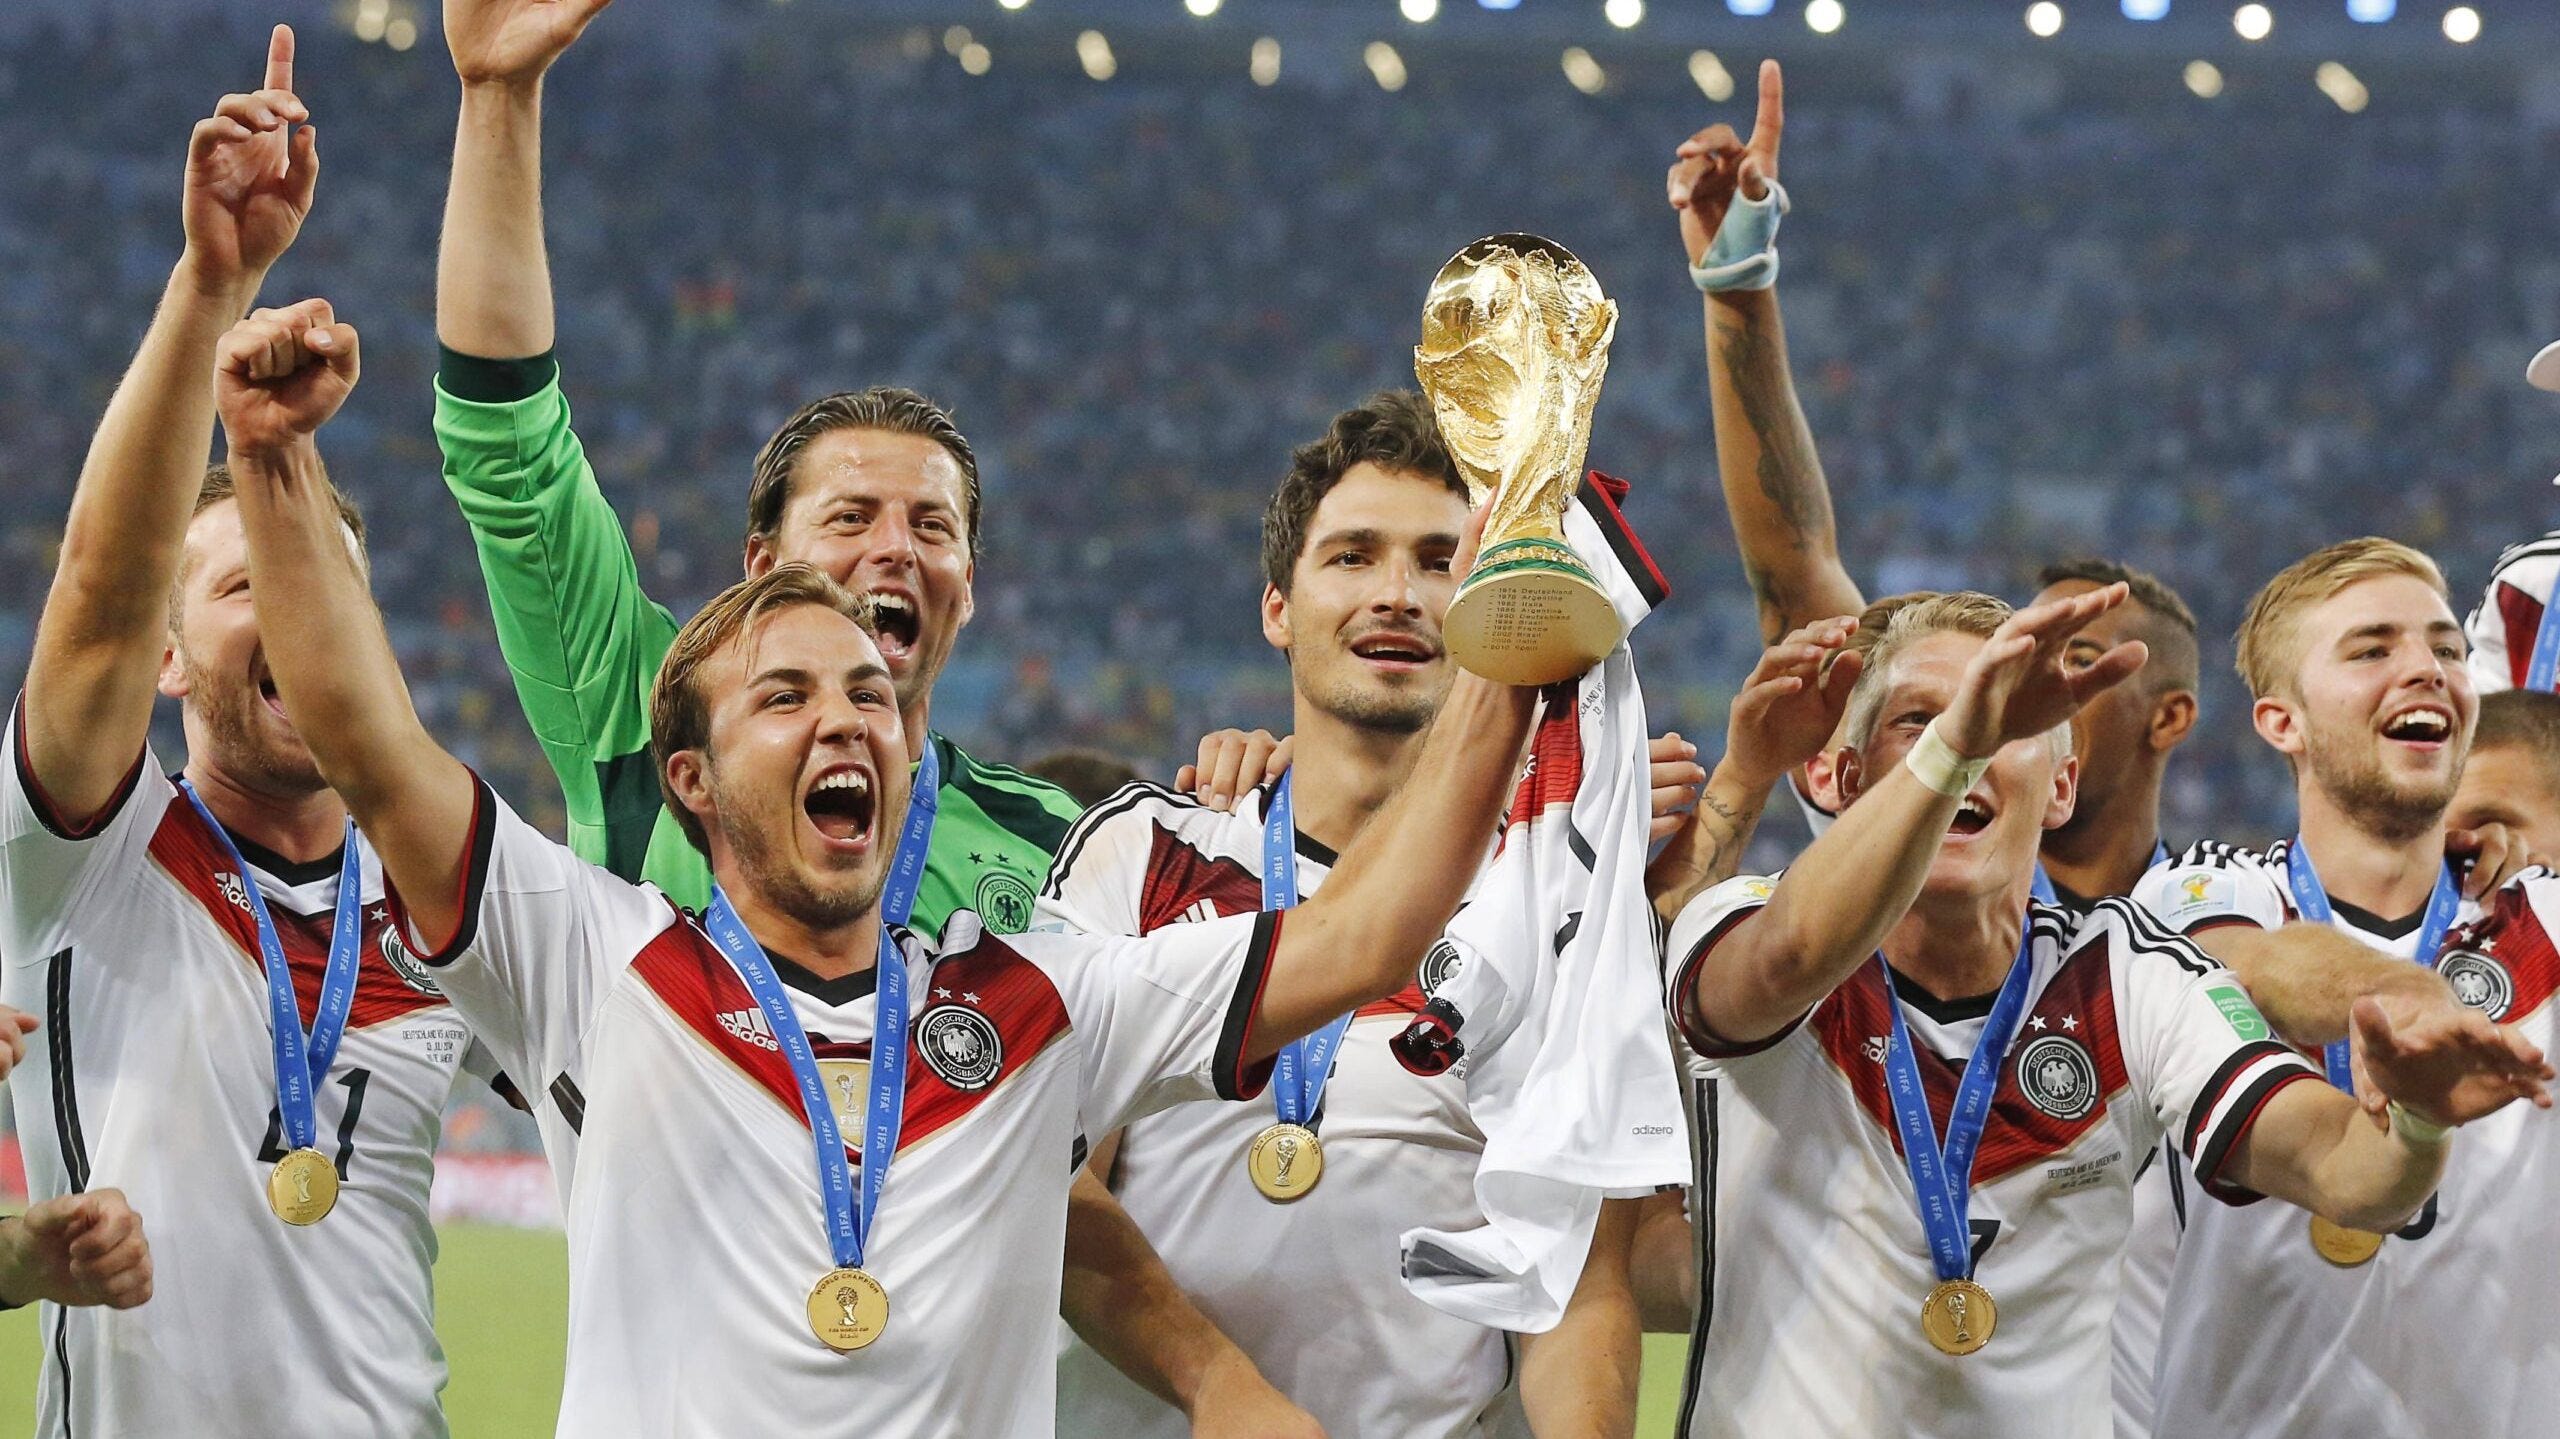 Did Germany Pay Bribe To Host The 2006 FIFA World Cup?